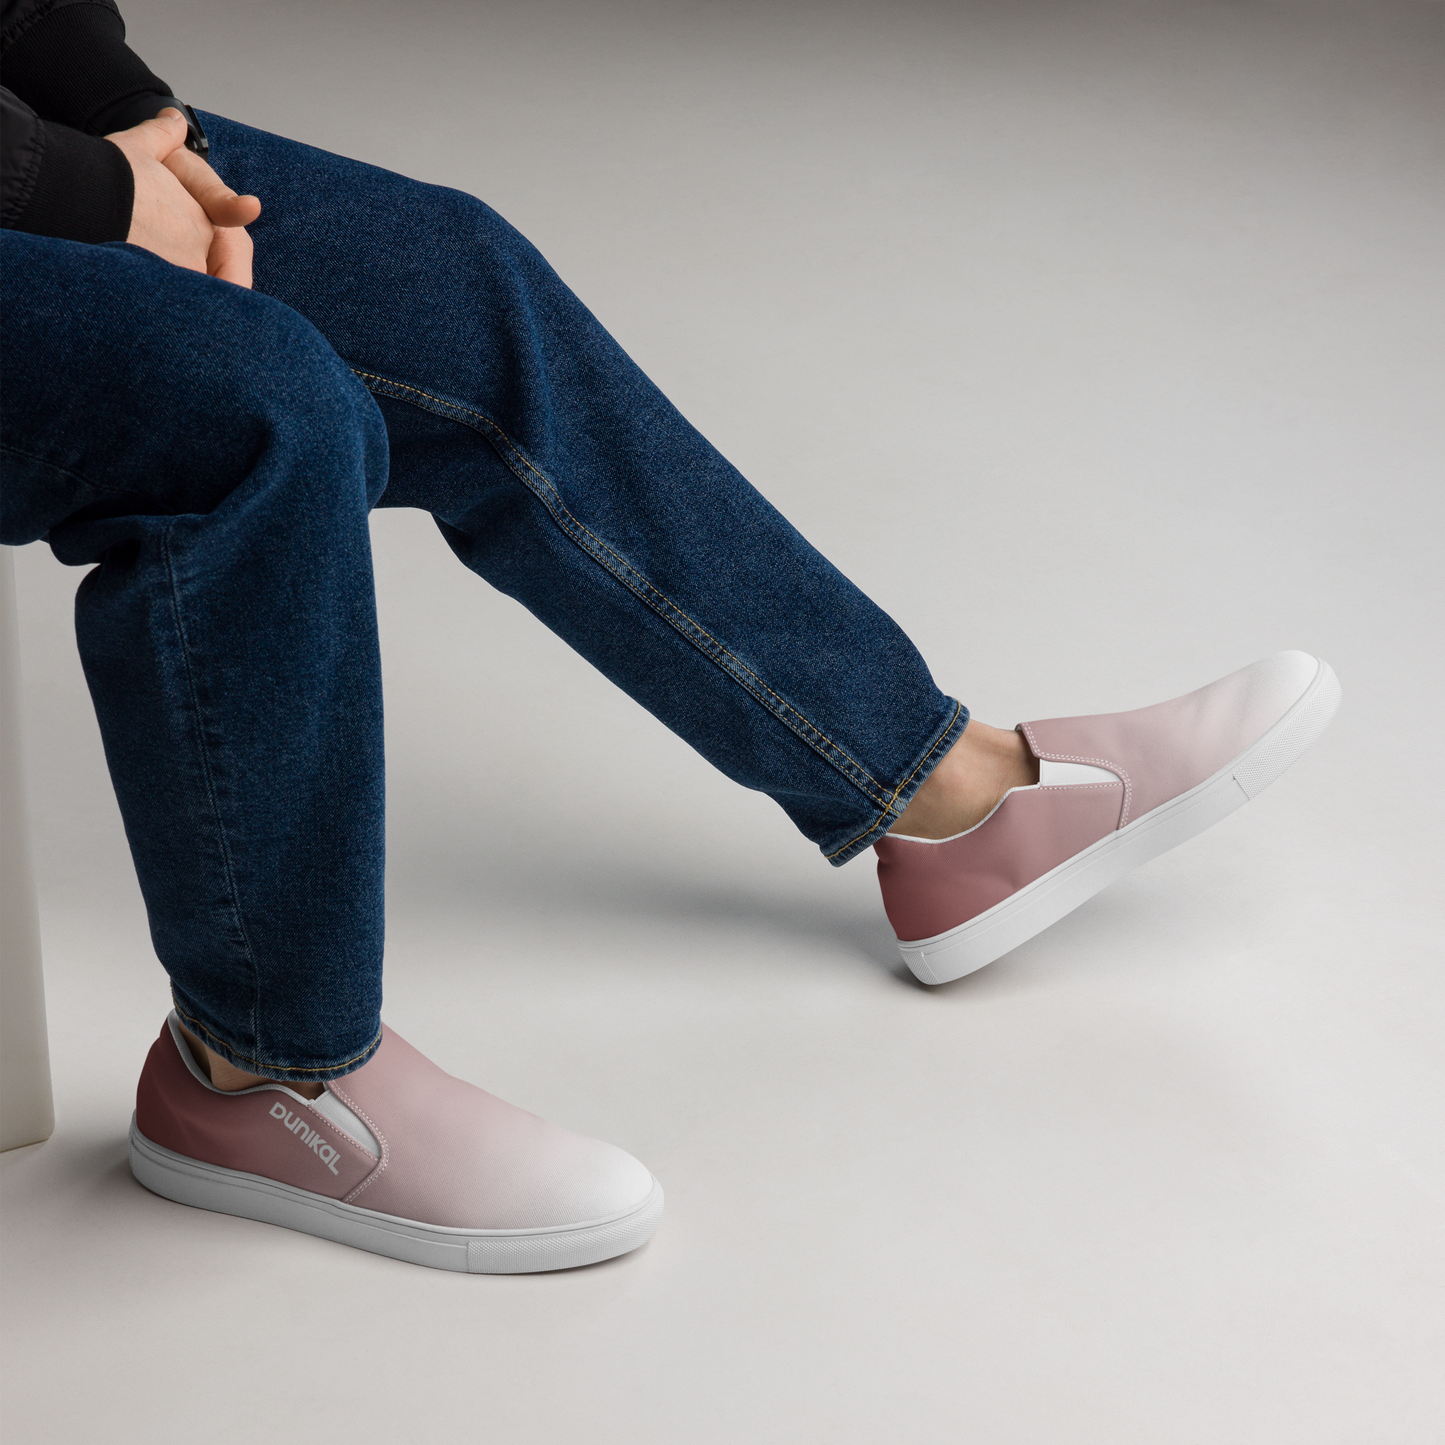 Men's Canvas Slip-Ons ❯ Pure Gradient ❯ Tuscan Earth